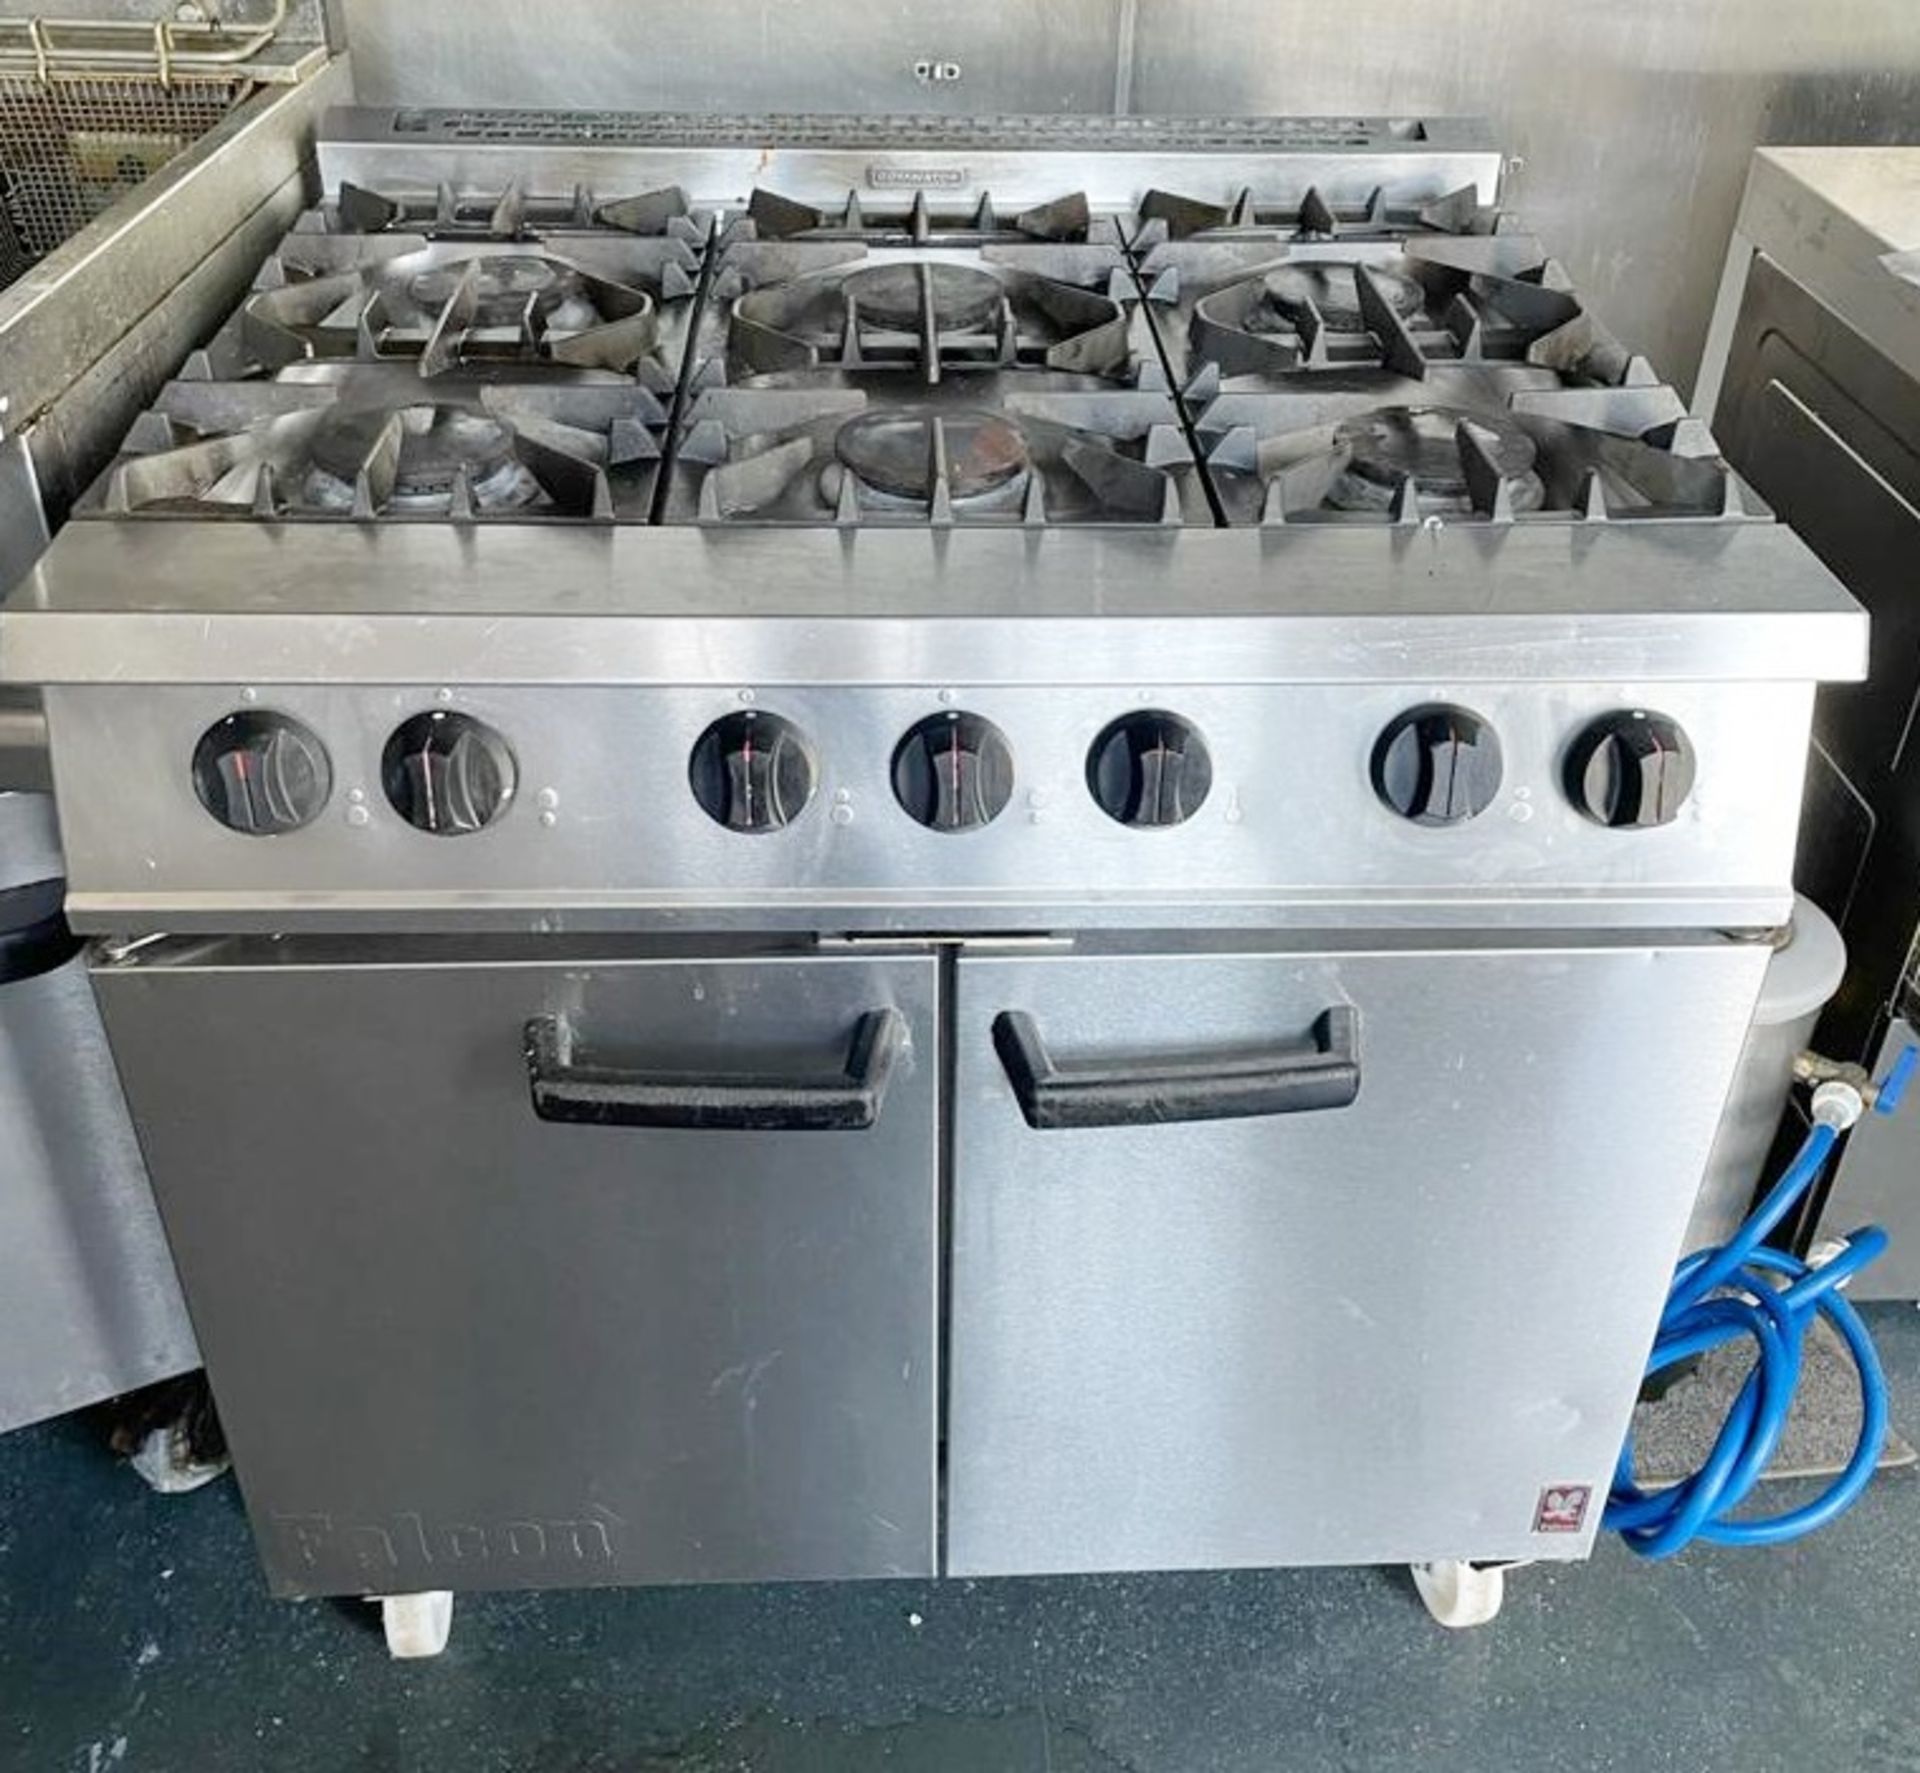 1 x Falcon Dominator 6 Burner Range Cooker With Stainless Steel Exterior - CL667 - Location: